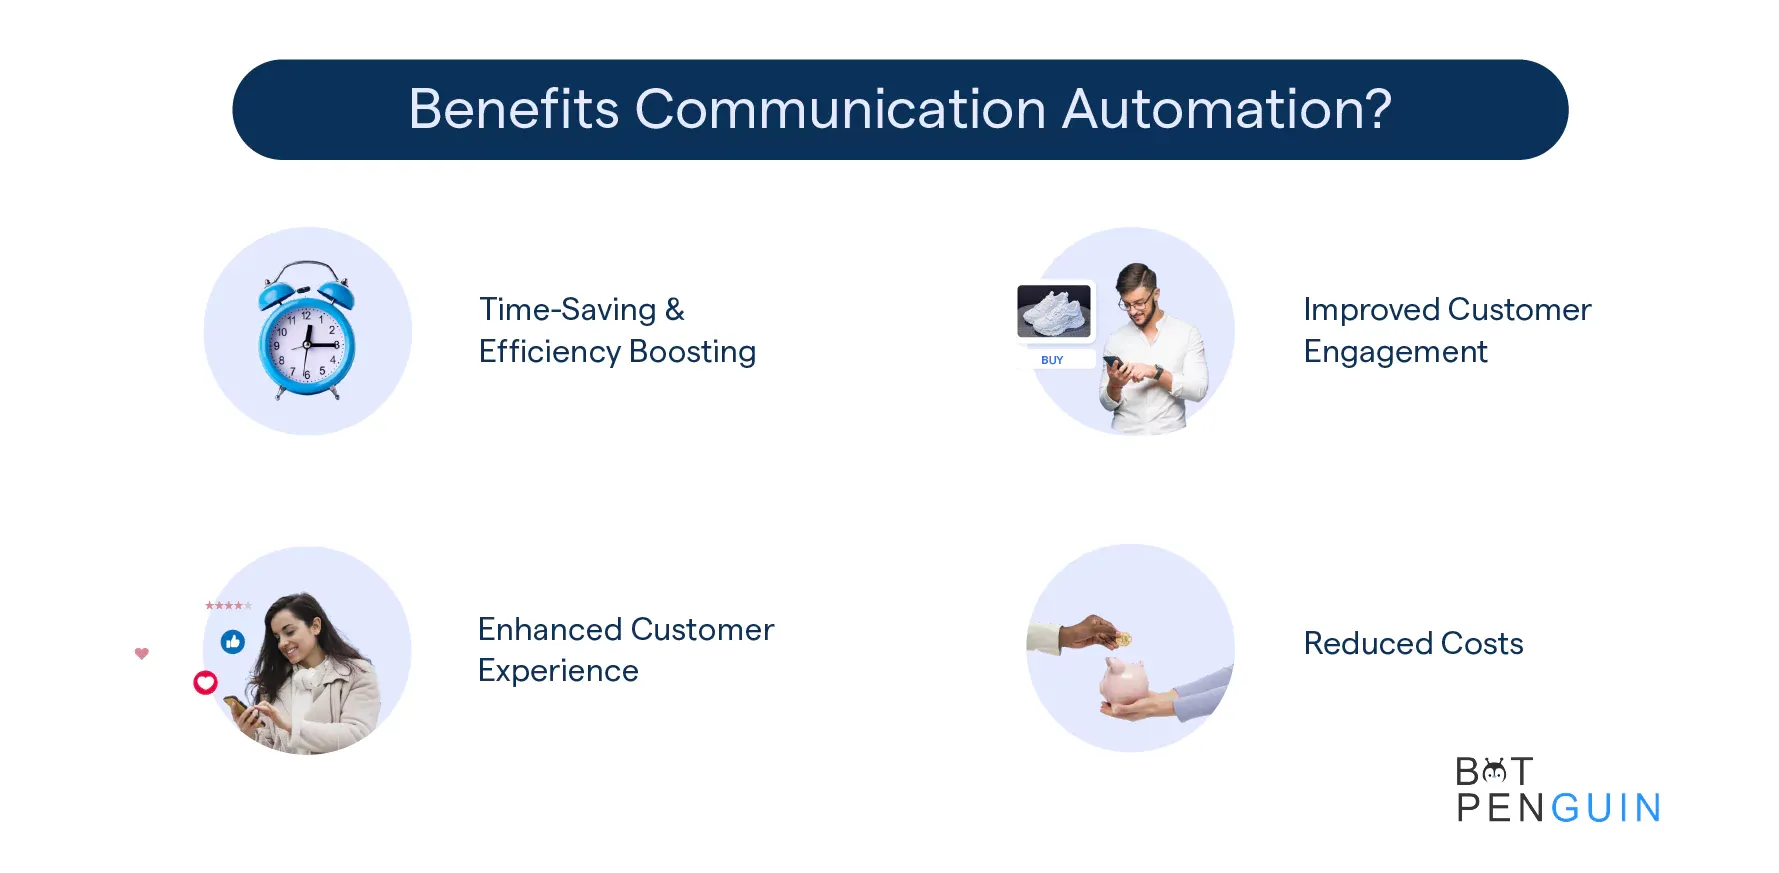 Why should one choose to invest in communication automation